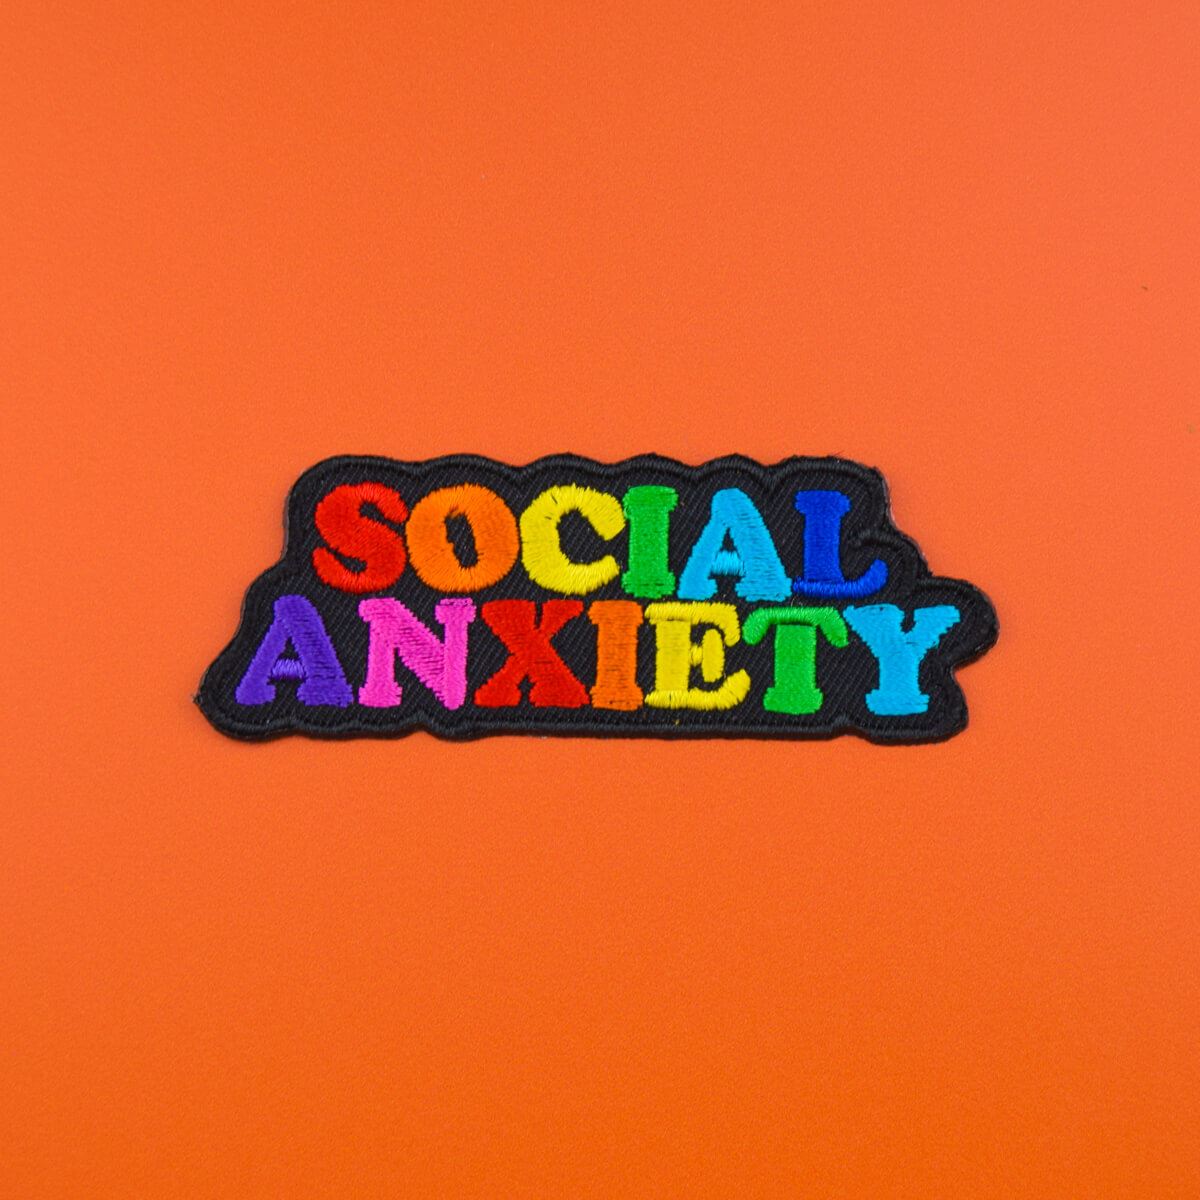 Social Anxiety Patch